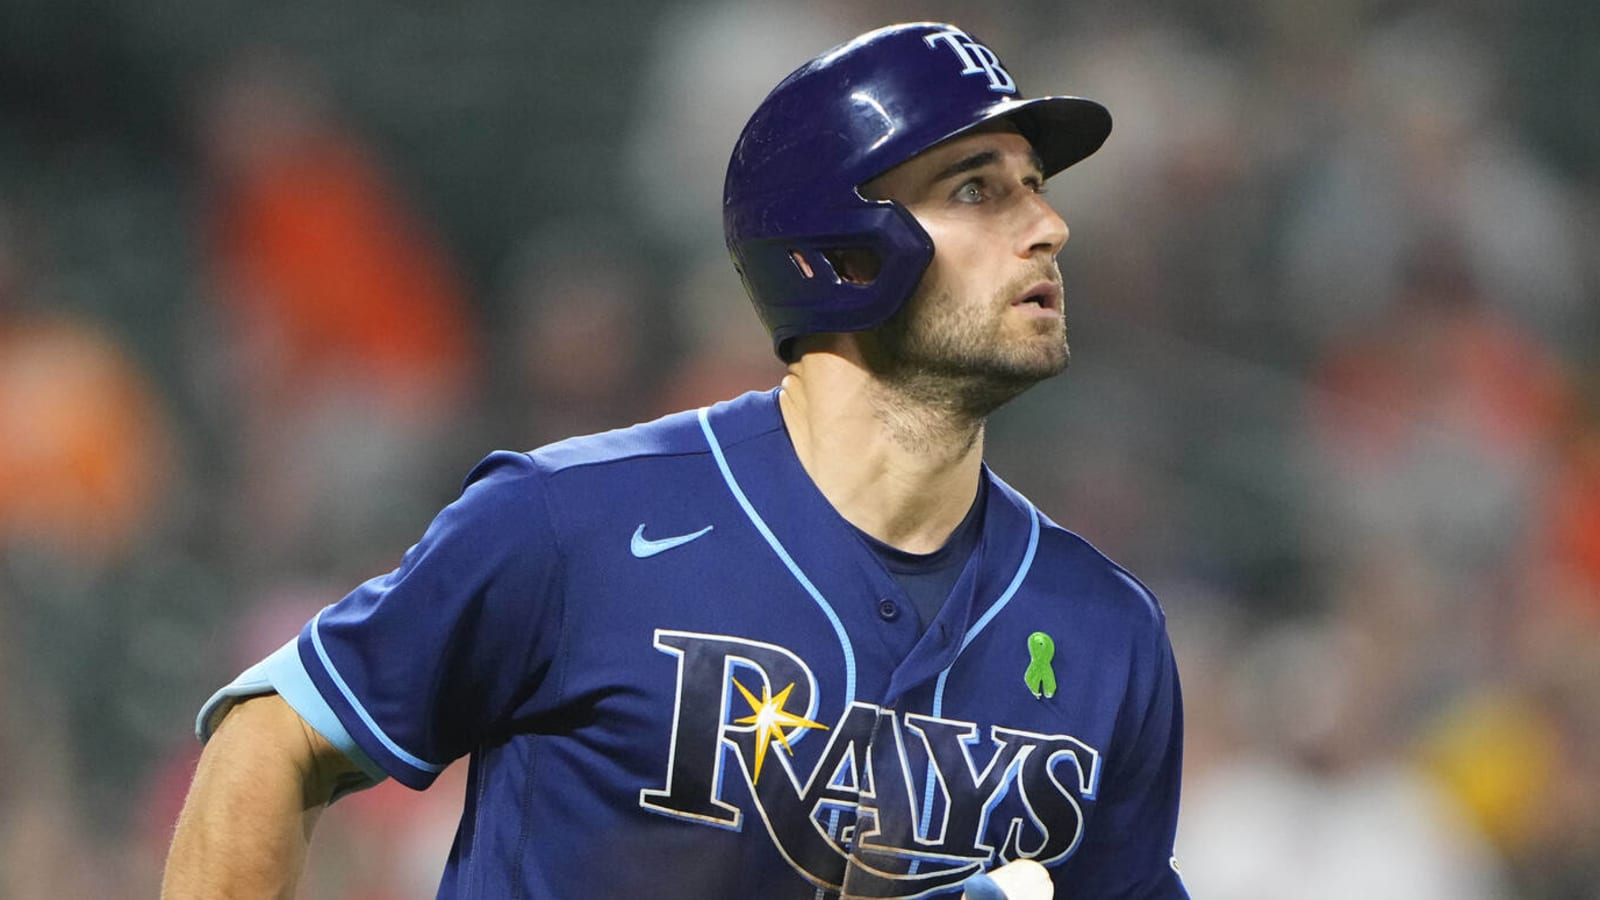 Kevin Kiermaier knows what he is doing